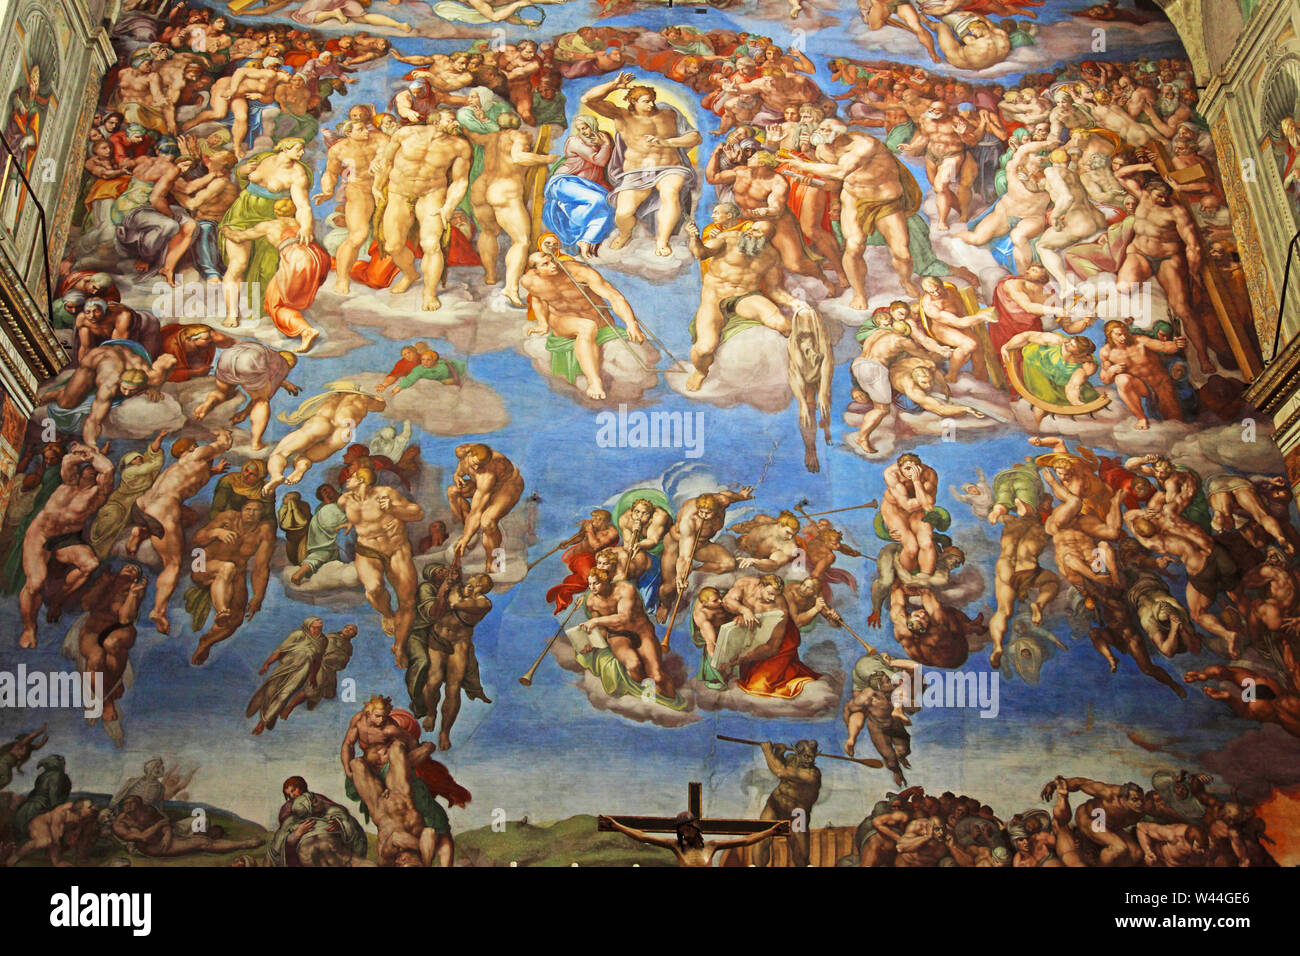 Part of The Last Judgement by Michelangelo on a wall of the Sistine Chapel in the Vatican Stock Photo